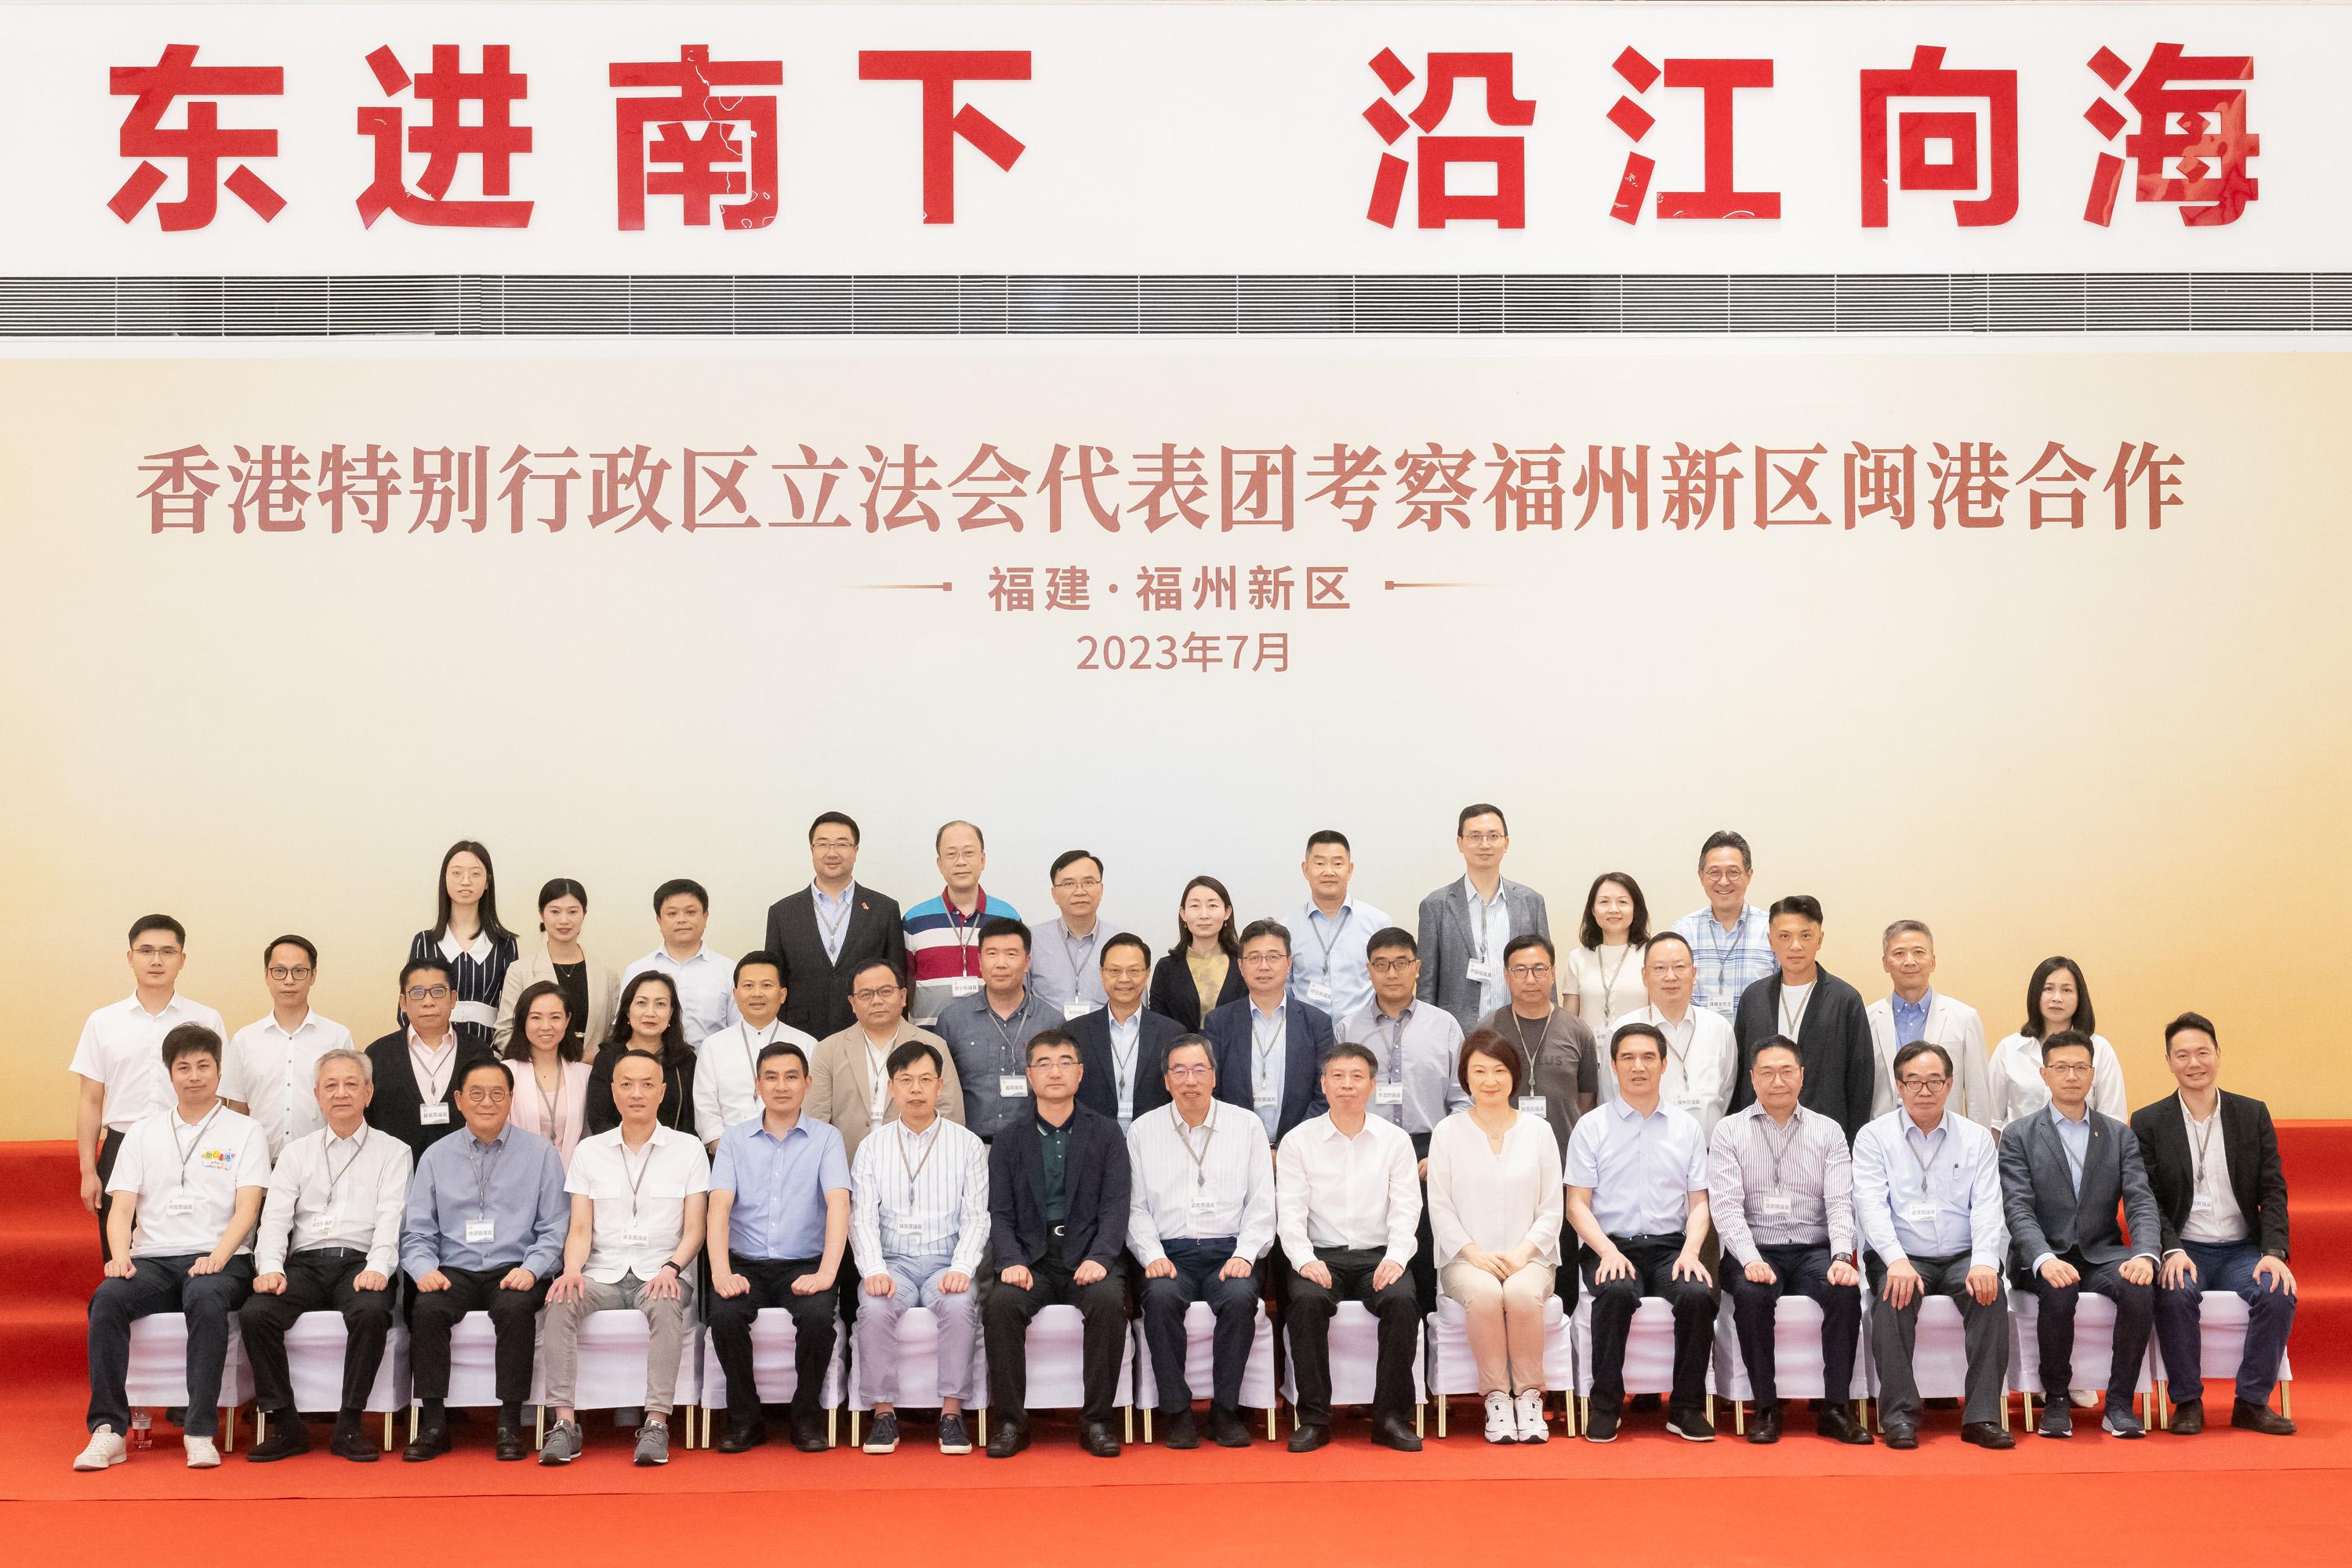 The Legislative Council (LegCo) delegation begins the five-day study visit in Fujian province today (July 15). Photo shows the delegation takes a group photo with the Secretariat of the Consultative Committee on Fujian-Hong Kong Co-operation.